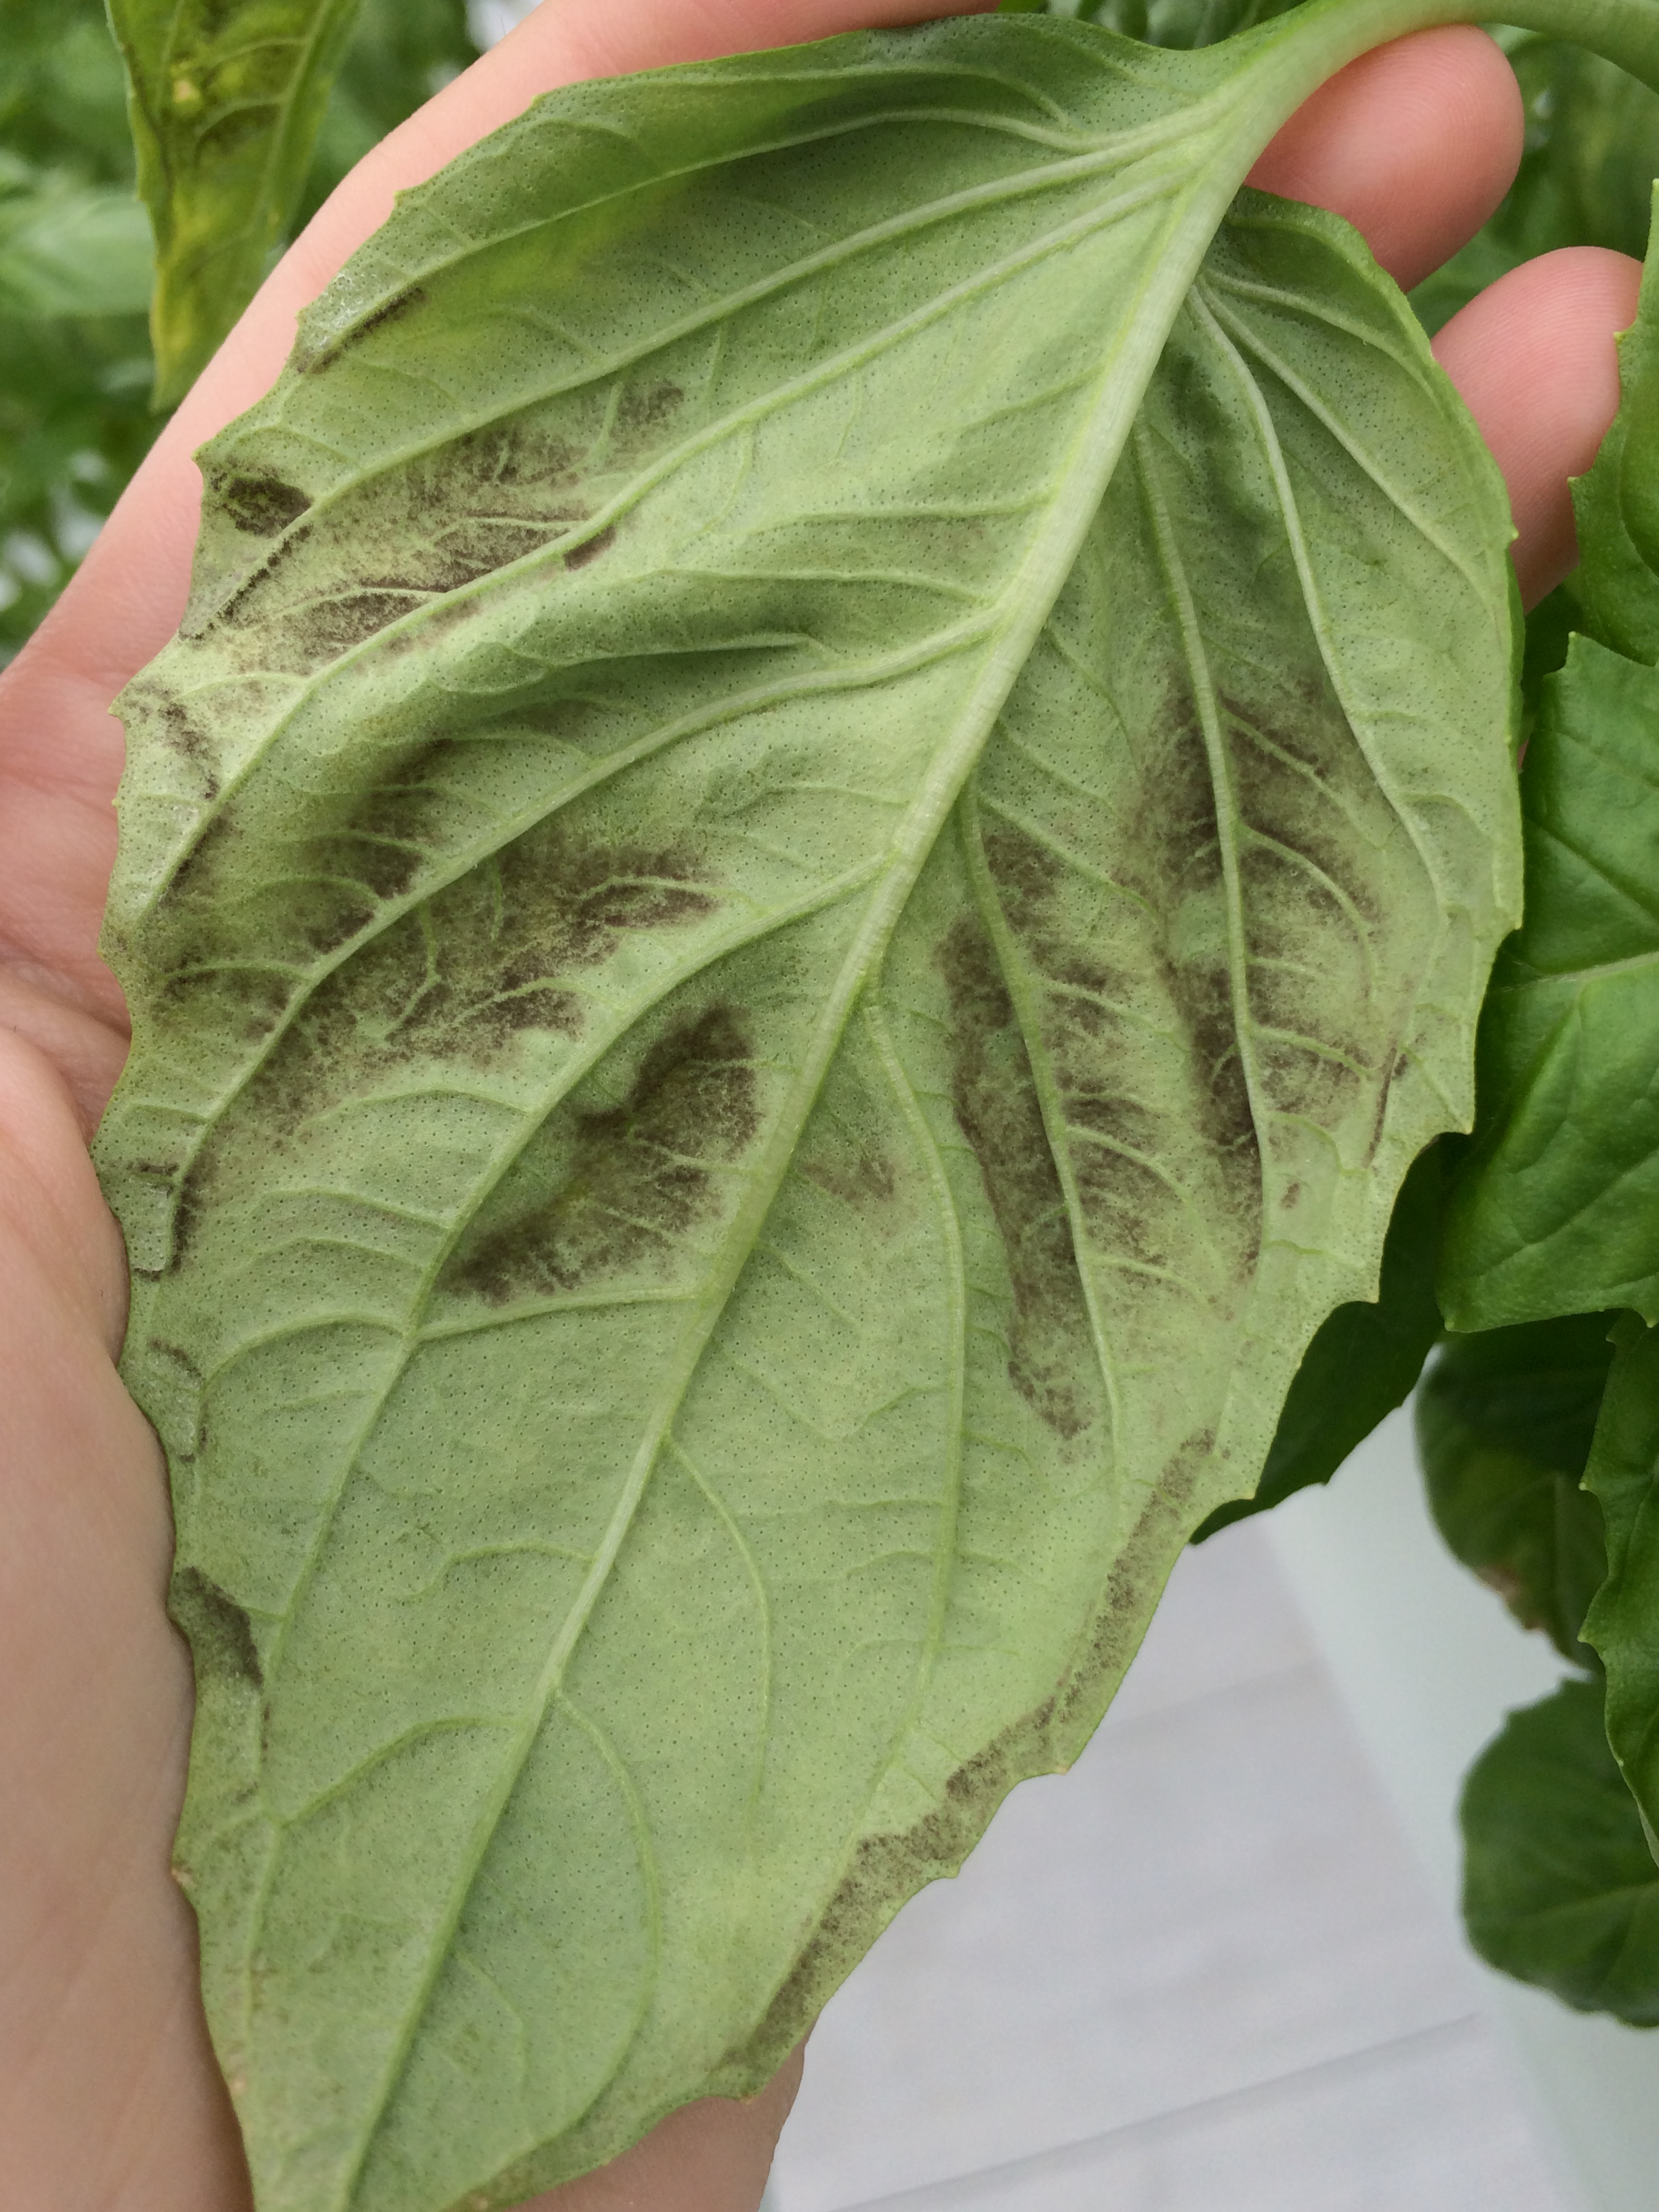 Signs of basil downy mildew on the lower leaf surface.